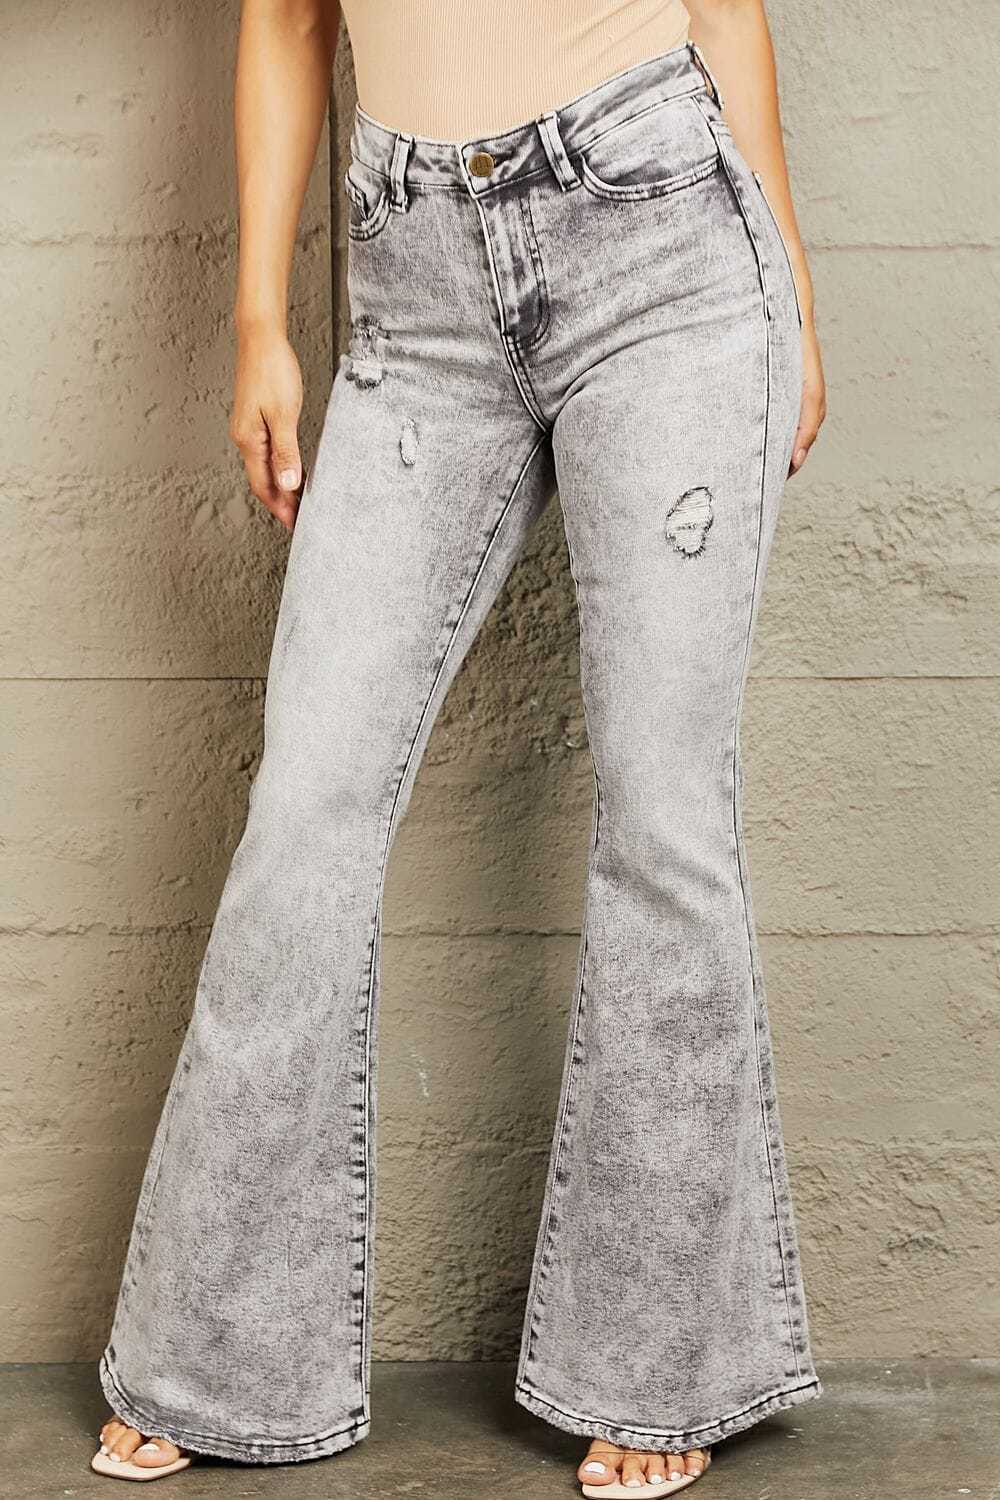 Primary image for BAYEAS Charcoal Grey High Waisted Acid Wash Flare Jeans